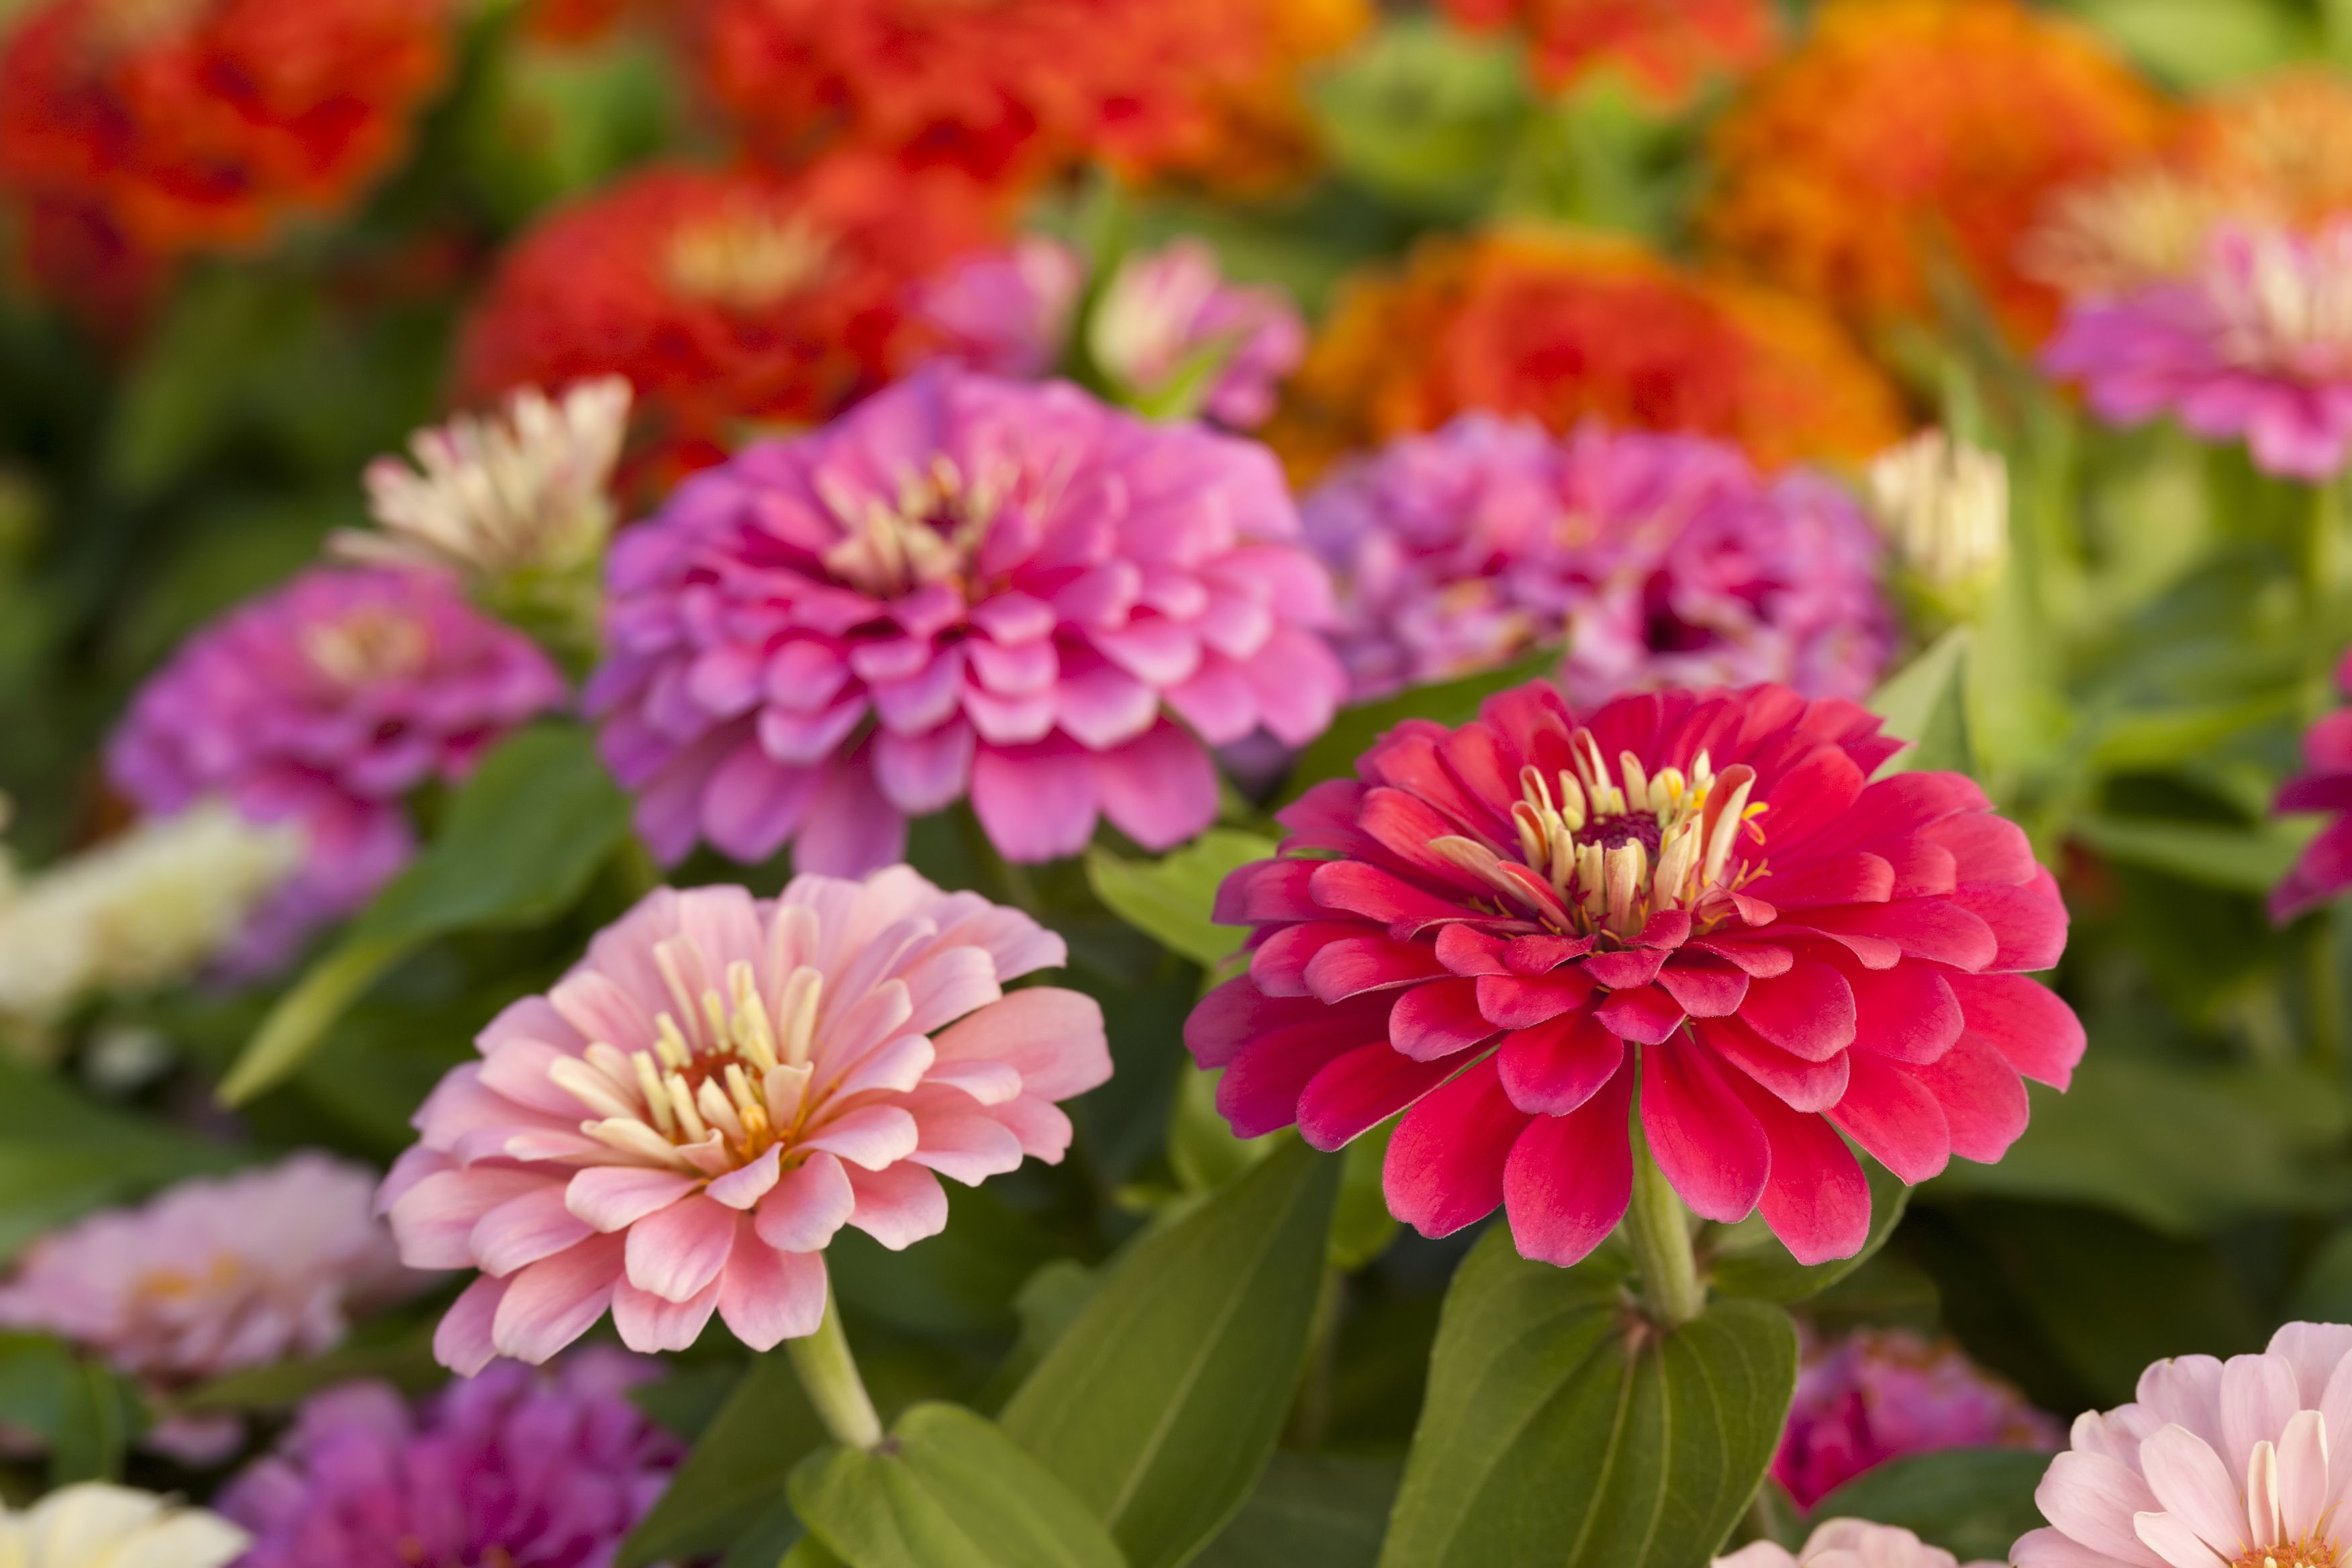 Image of Zinnia annual flower that blooms all summer